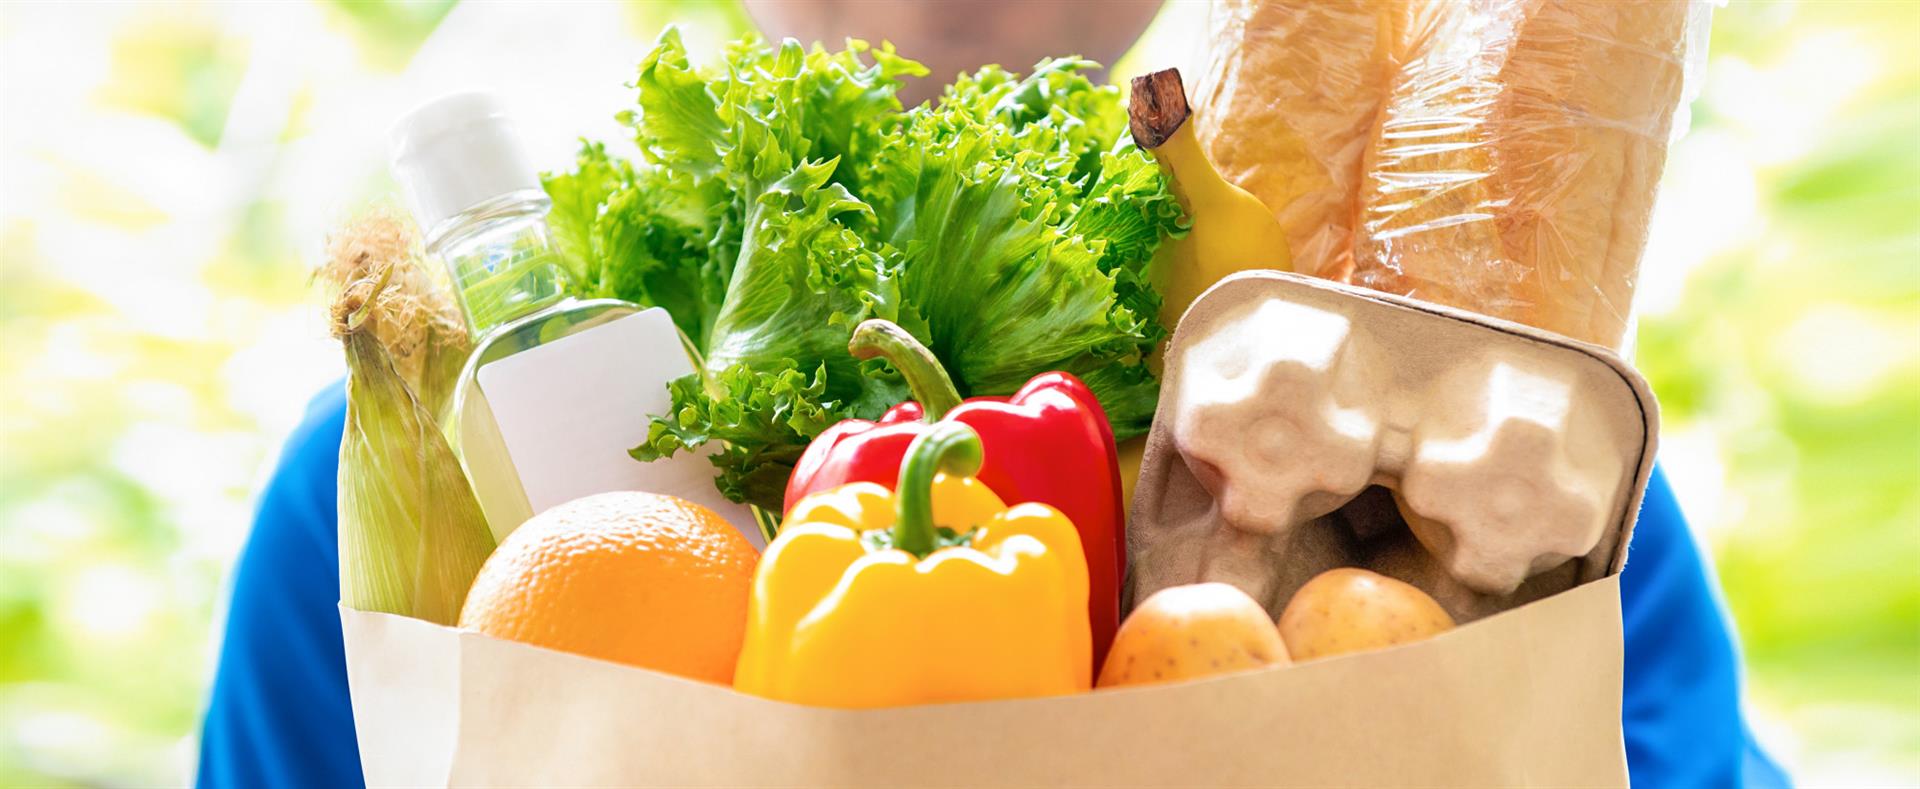 Shopping basket containing healthy foods